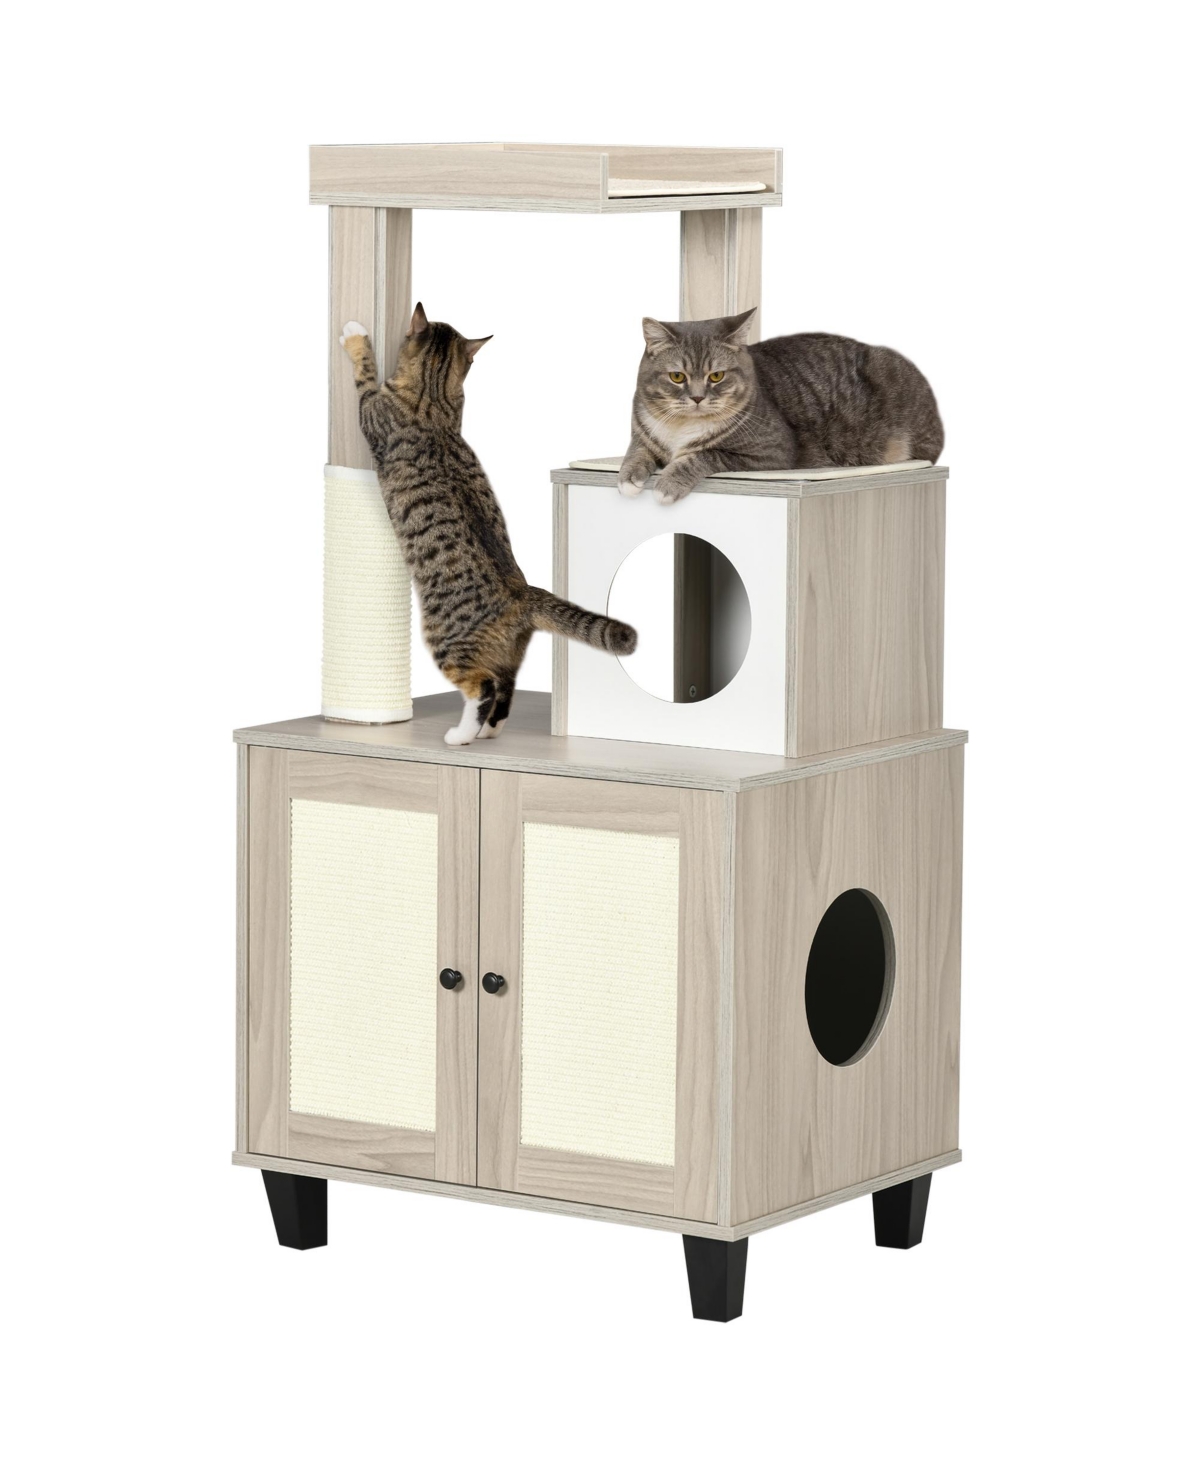 Cat Litter Box Enclosure Furniture with Cat Tree, Hidden Litter Box with Scratching Post, Bed, Modern Cat House Indoor, Gray - Grey